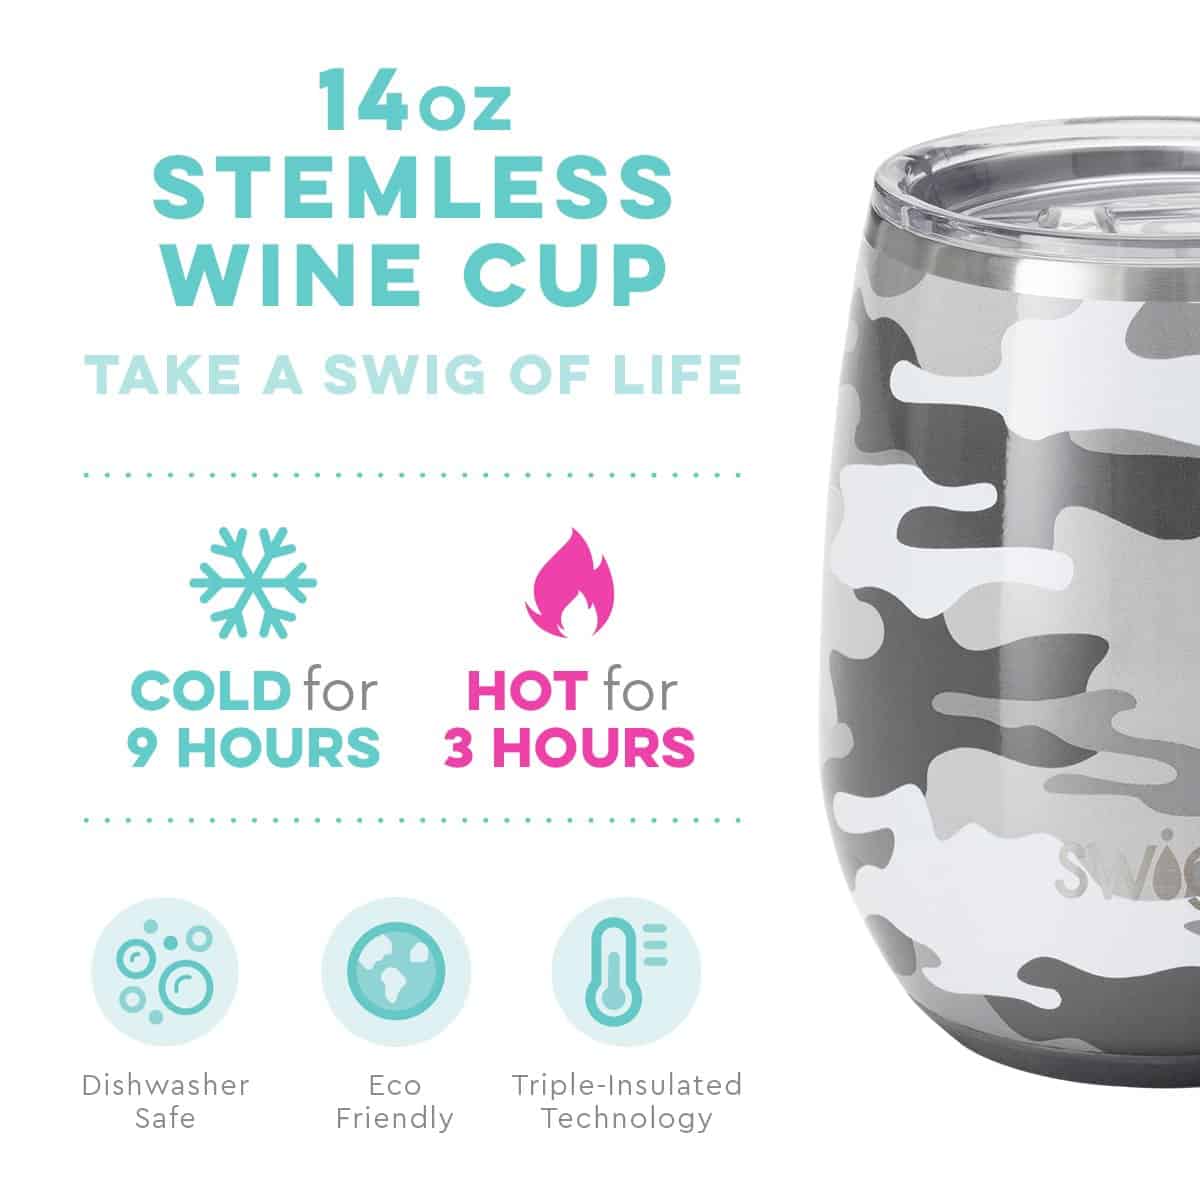 SWIG Incognito Camo Stemless Wine Cup (14oz) ⋆ Gypsy Girl Tween Boutique